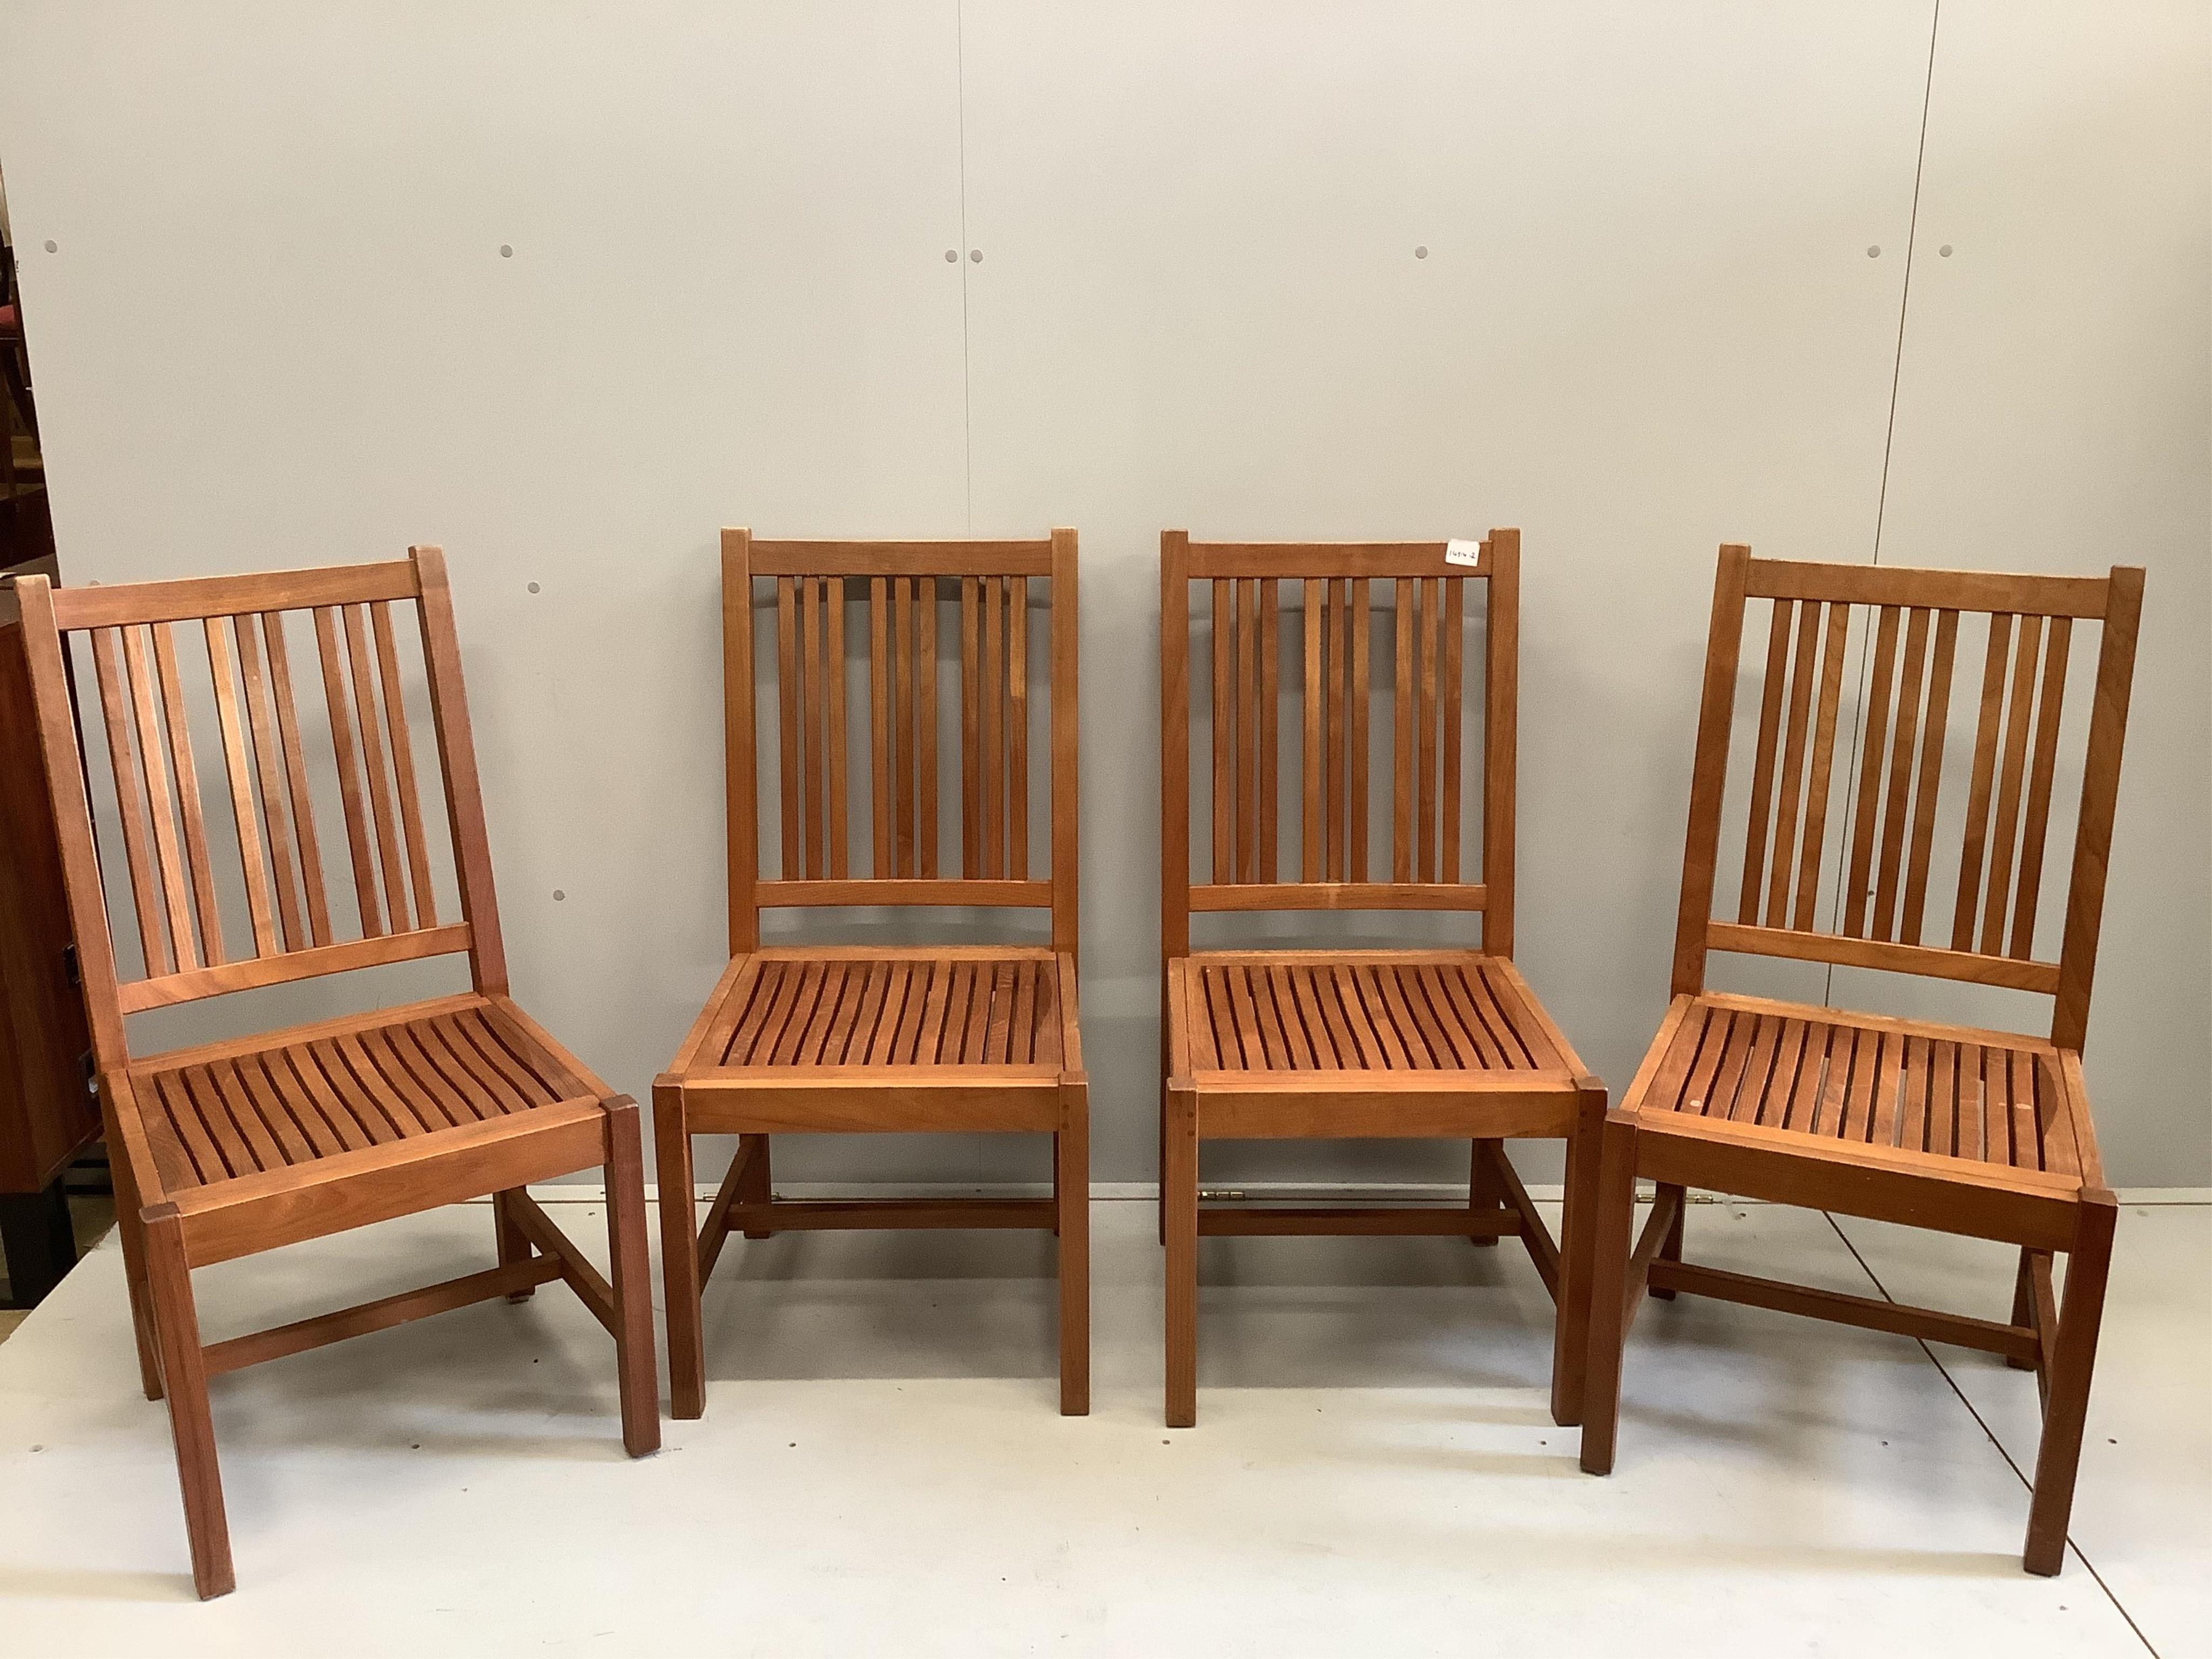 A set of four Barlow Tyrie Mission teak garden chairs, width 49cm, depth 47cm, height 99cm. Condition - good